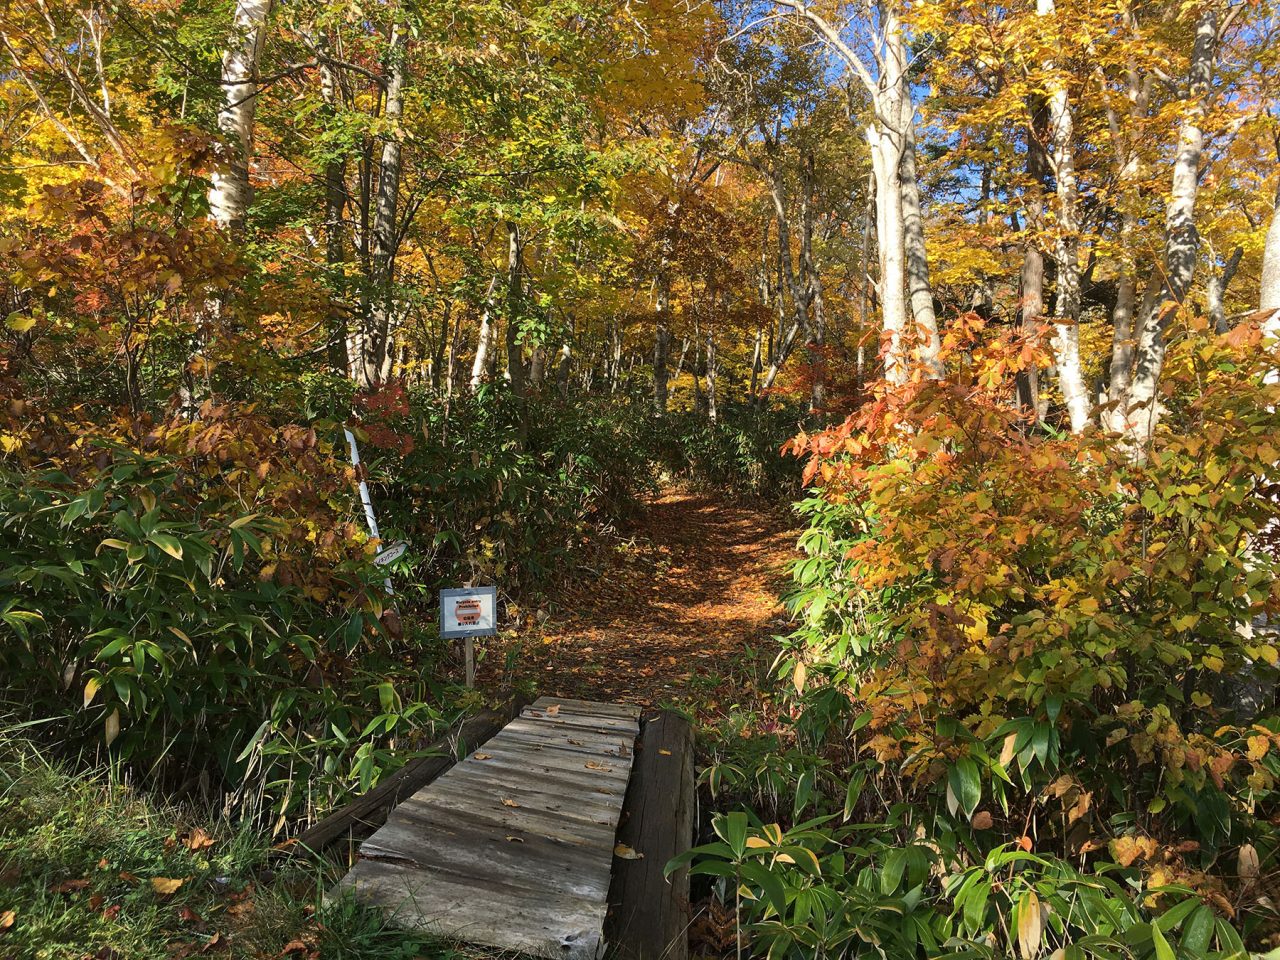 Entrance to the hiking trail